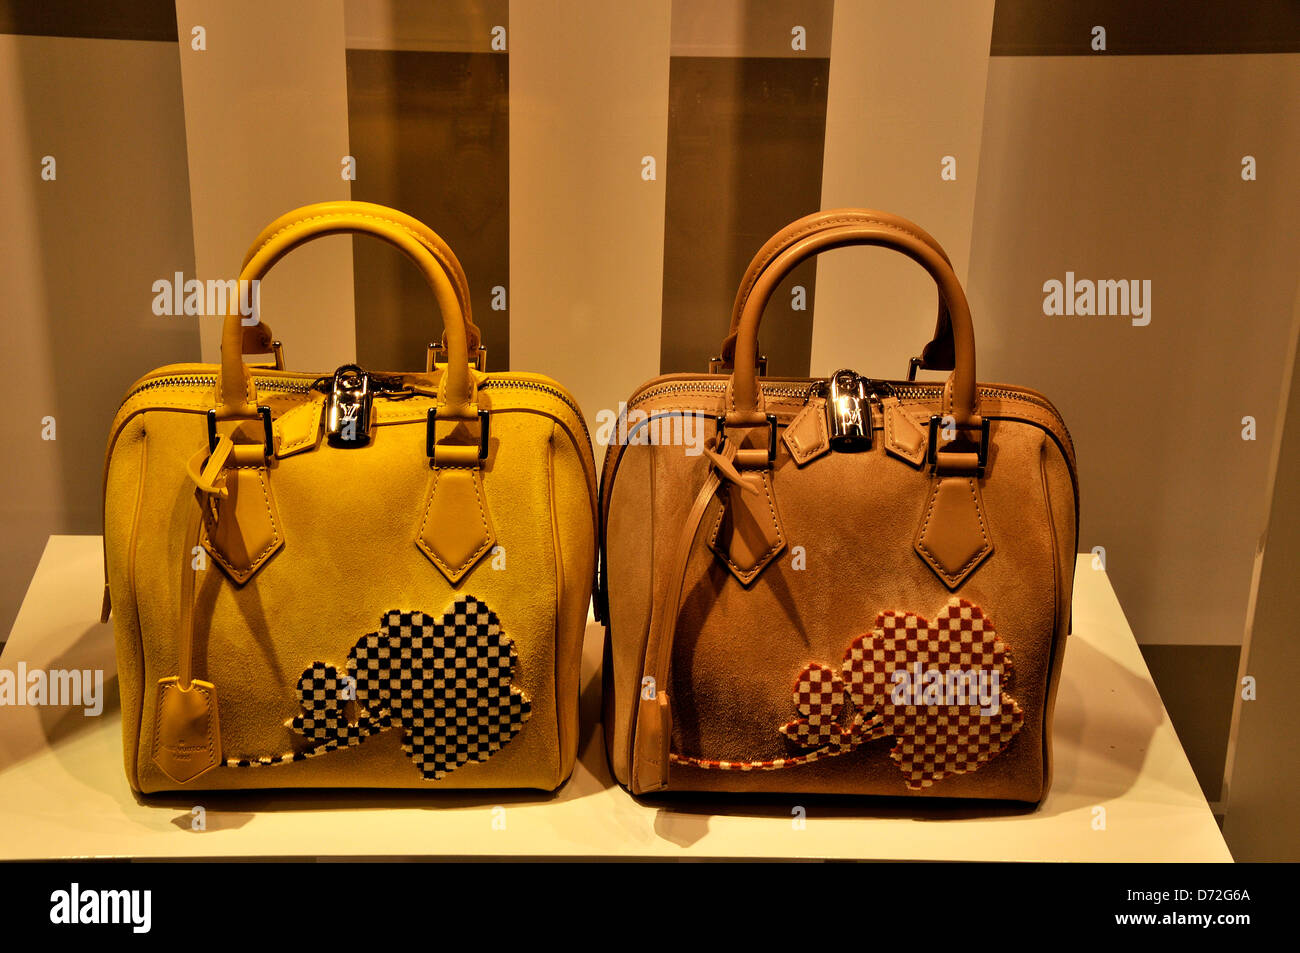 Louis Vuitton woman hand bag in the window of LV boutique in Dubai Stock Photo: 55990322 - Alamy